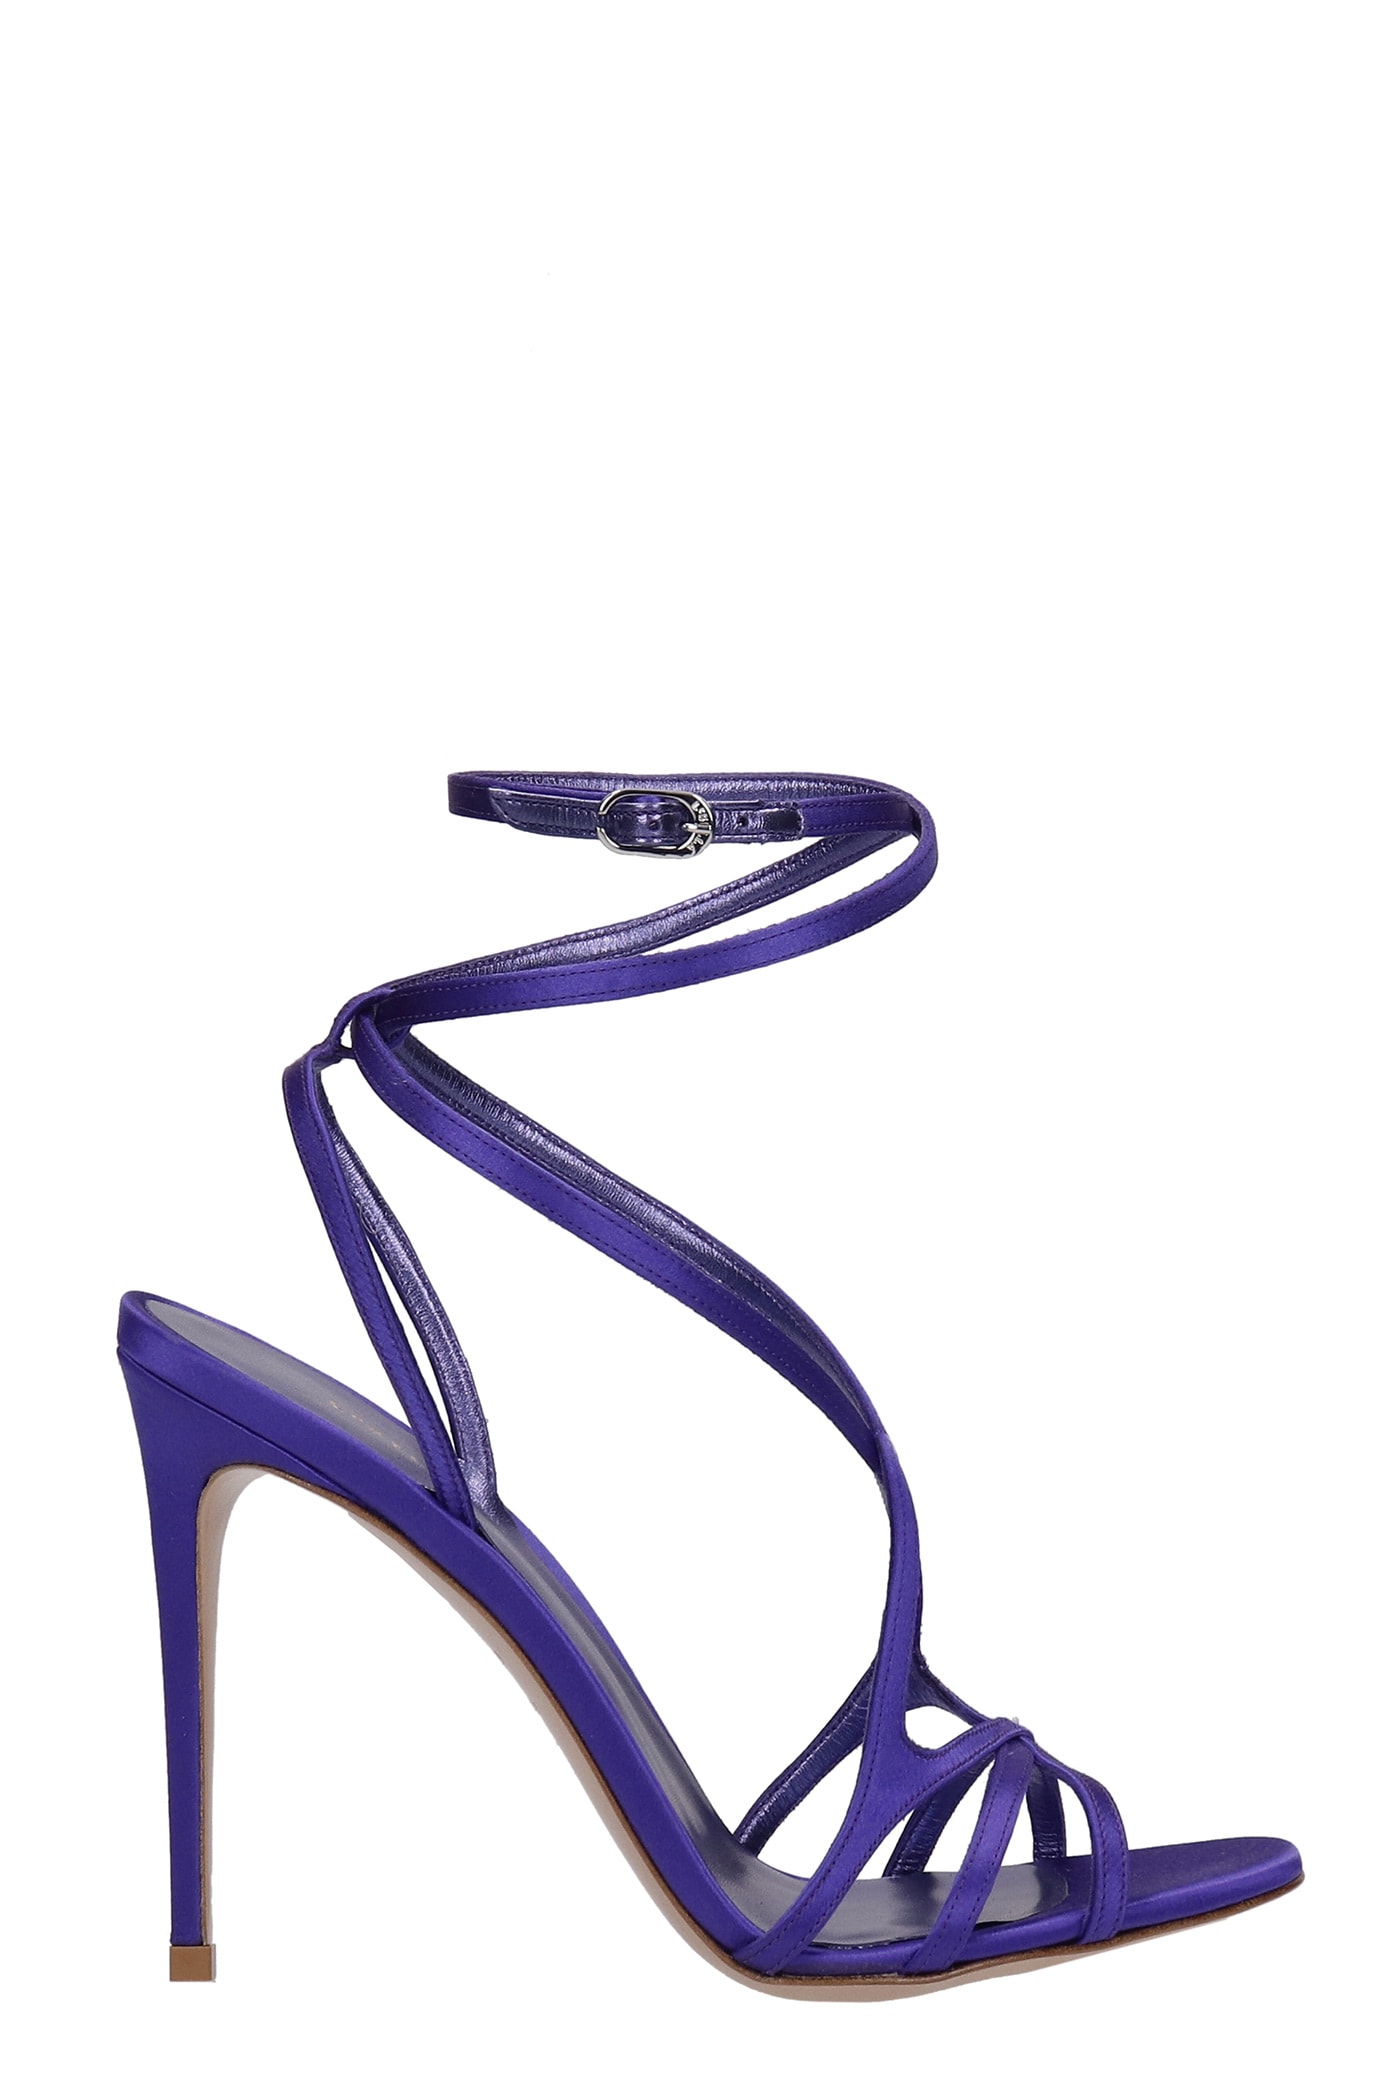 Le Silla Belen Sandals In Viola Leather